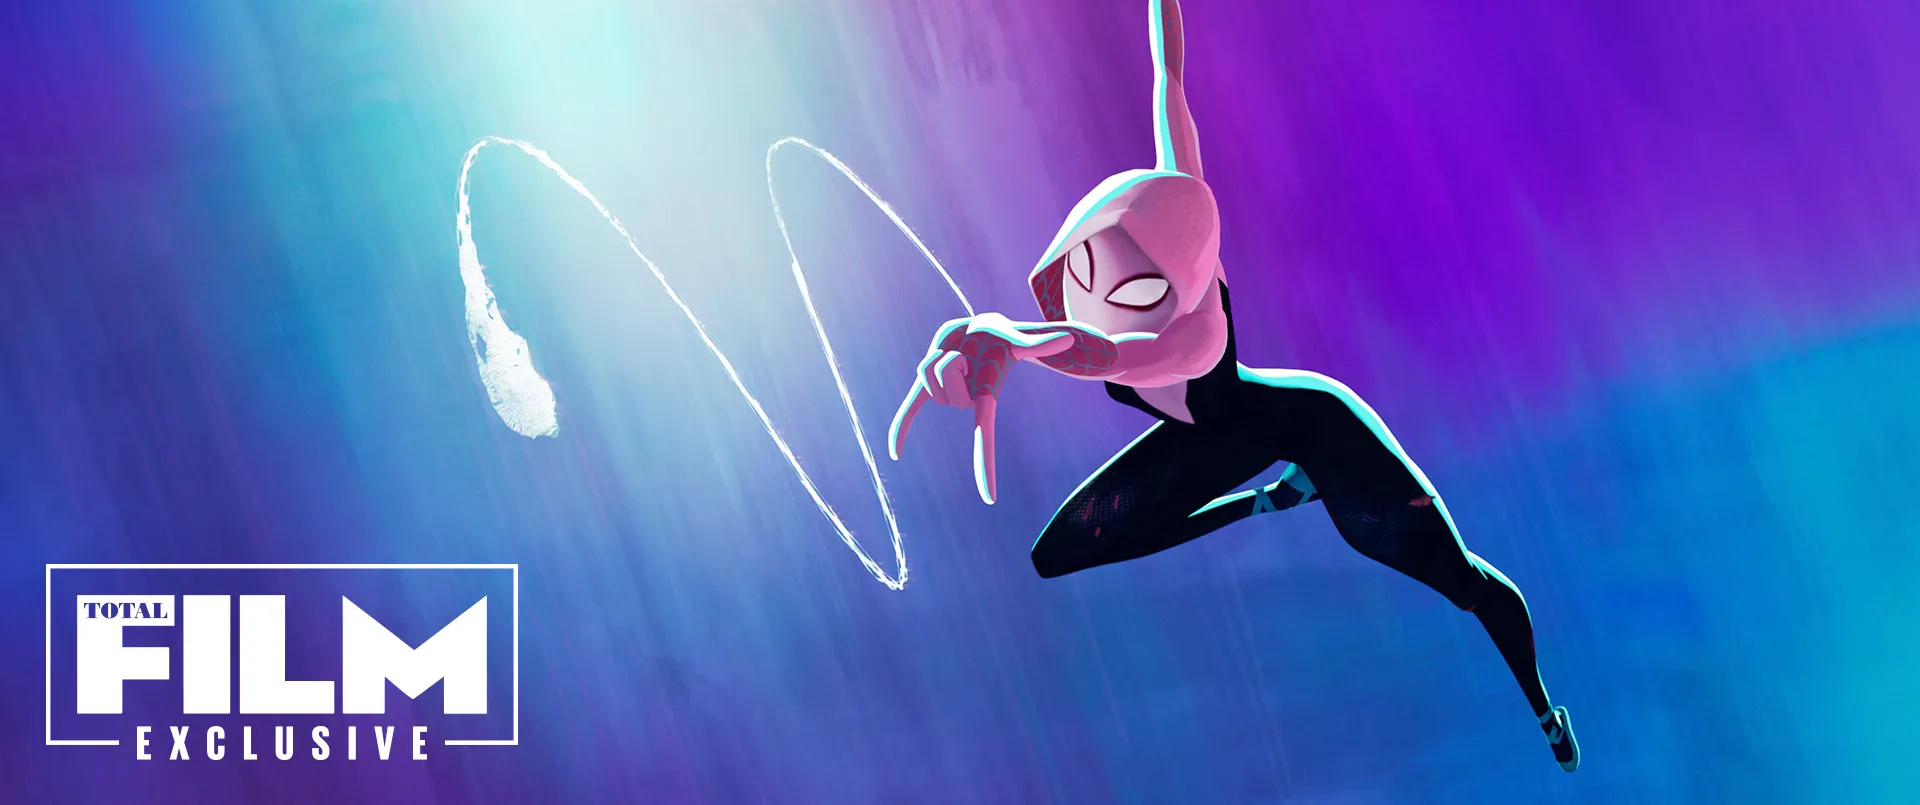 Classic - Spider-Man: Across the Spider-Verse: The Art of the Movie -  Gallery Update #6